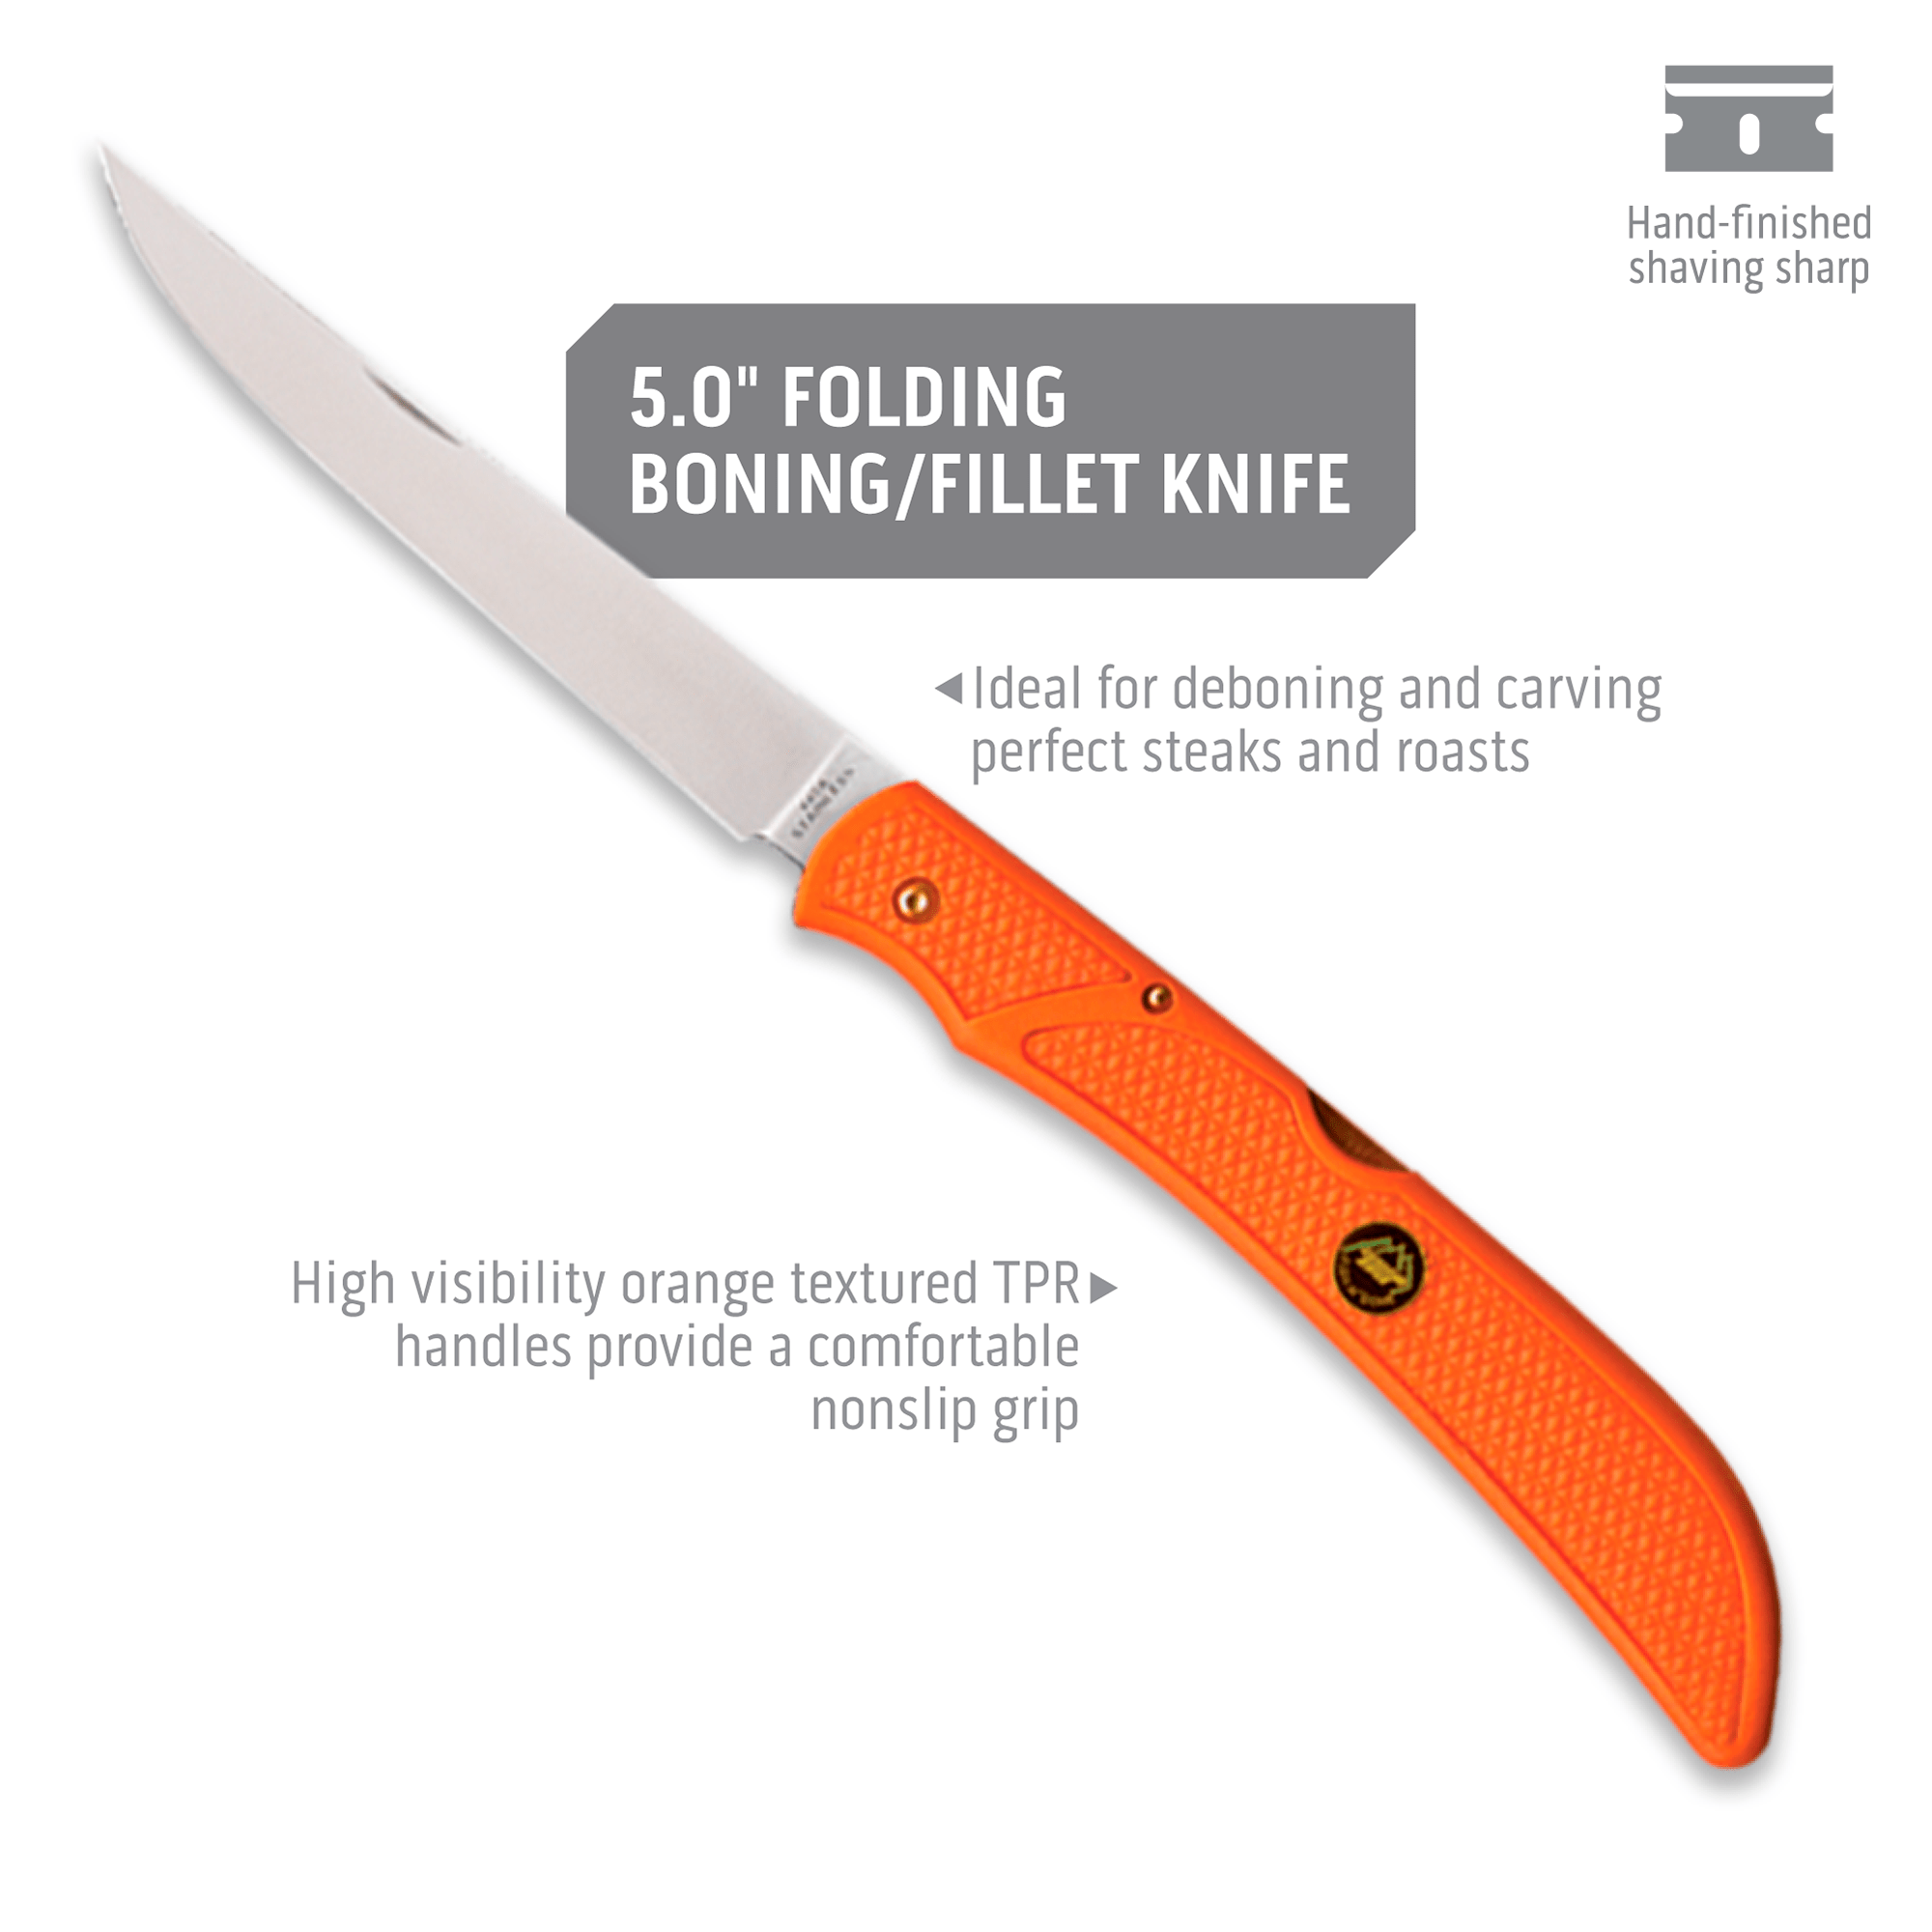 Outdoor Edge Outfitter Hunting Knife Set Product Photo showing blade lengths on folding/fillet knife.